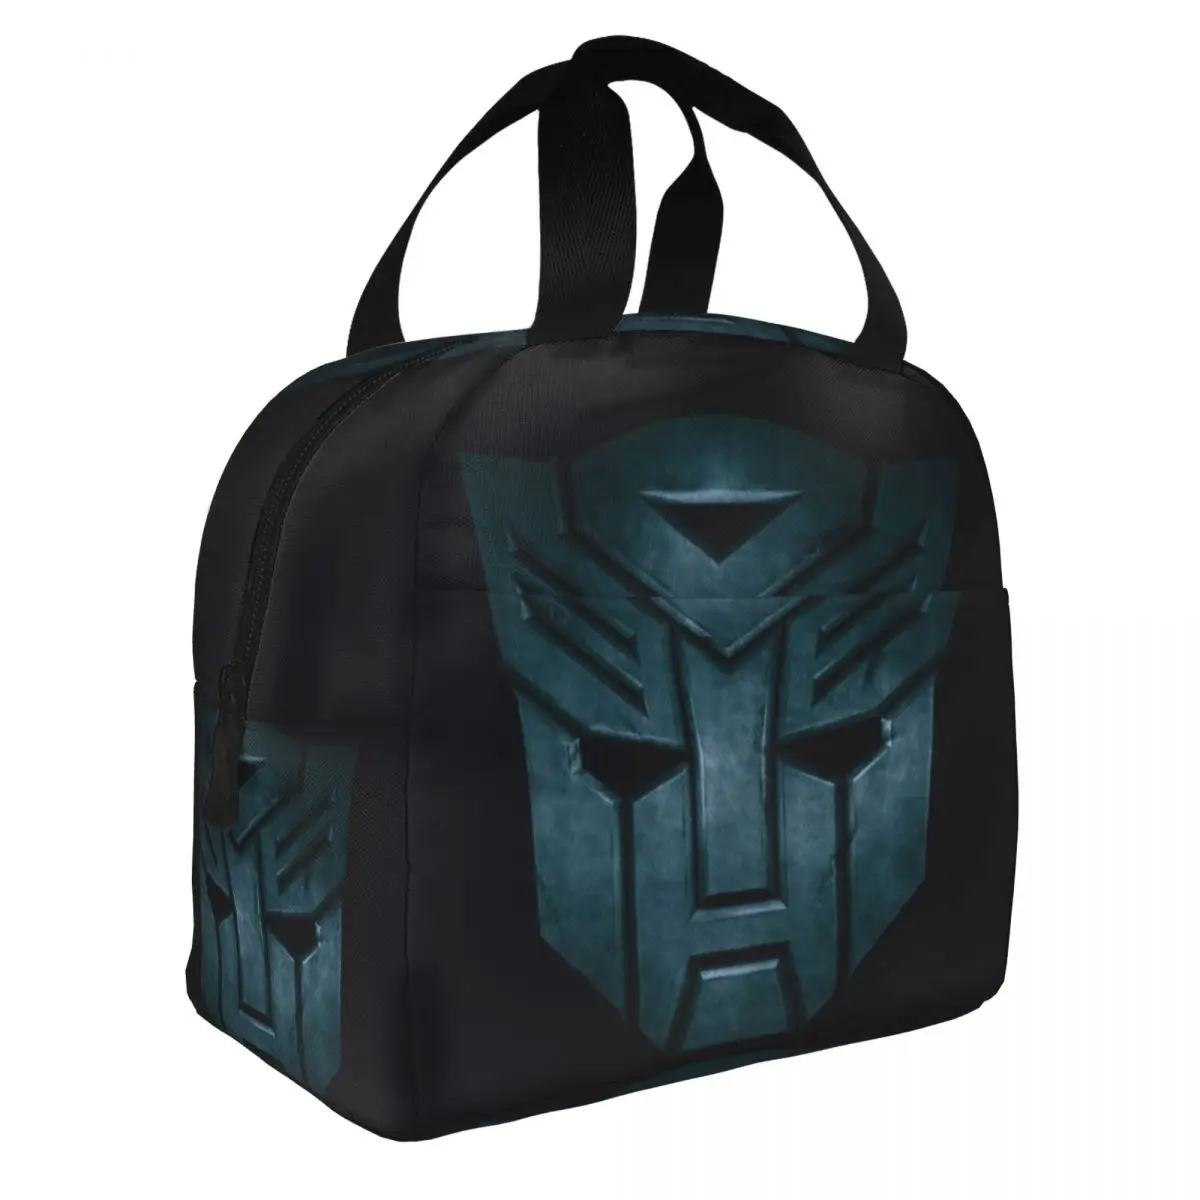 Transformers Lunch Bento Bags Portable Aluminum Foil thickened Thermal Cloth Lunch Bag for Women Men Boy